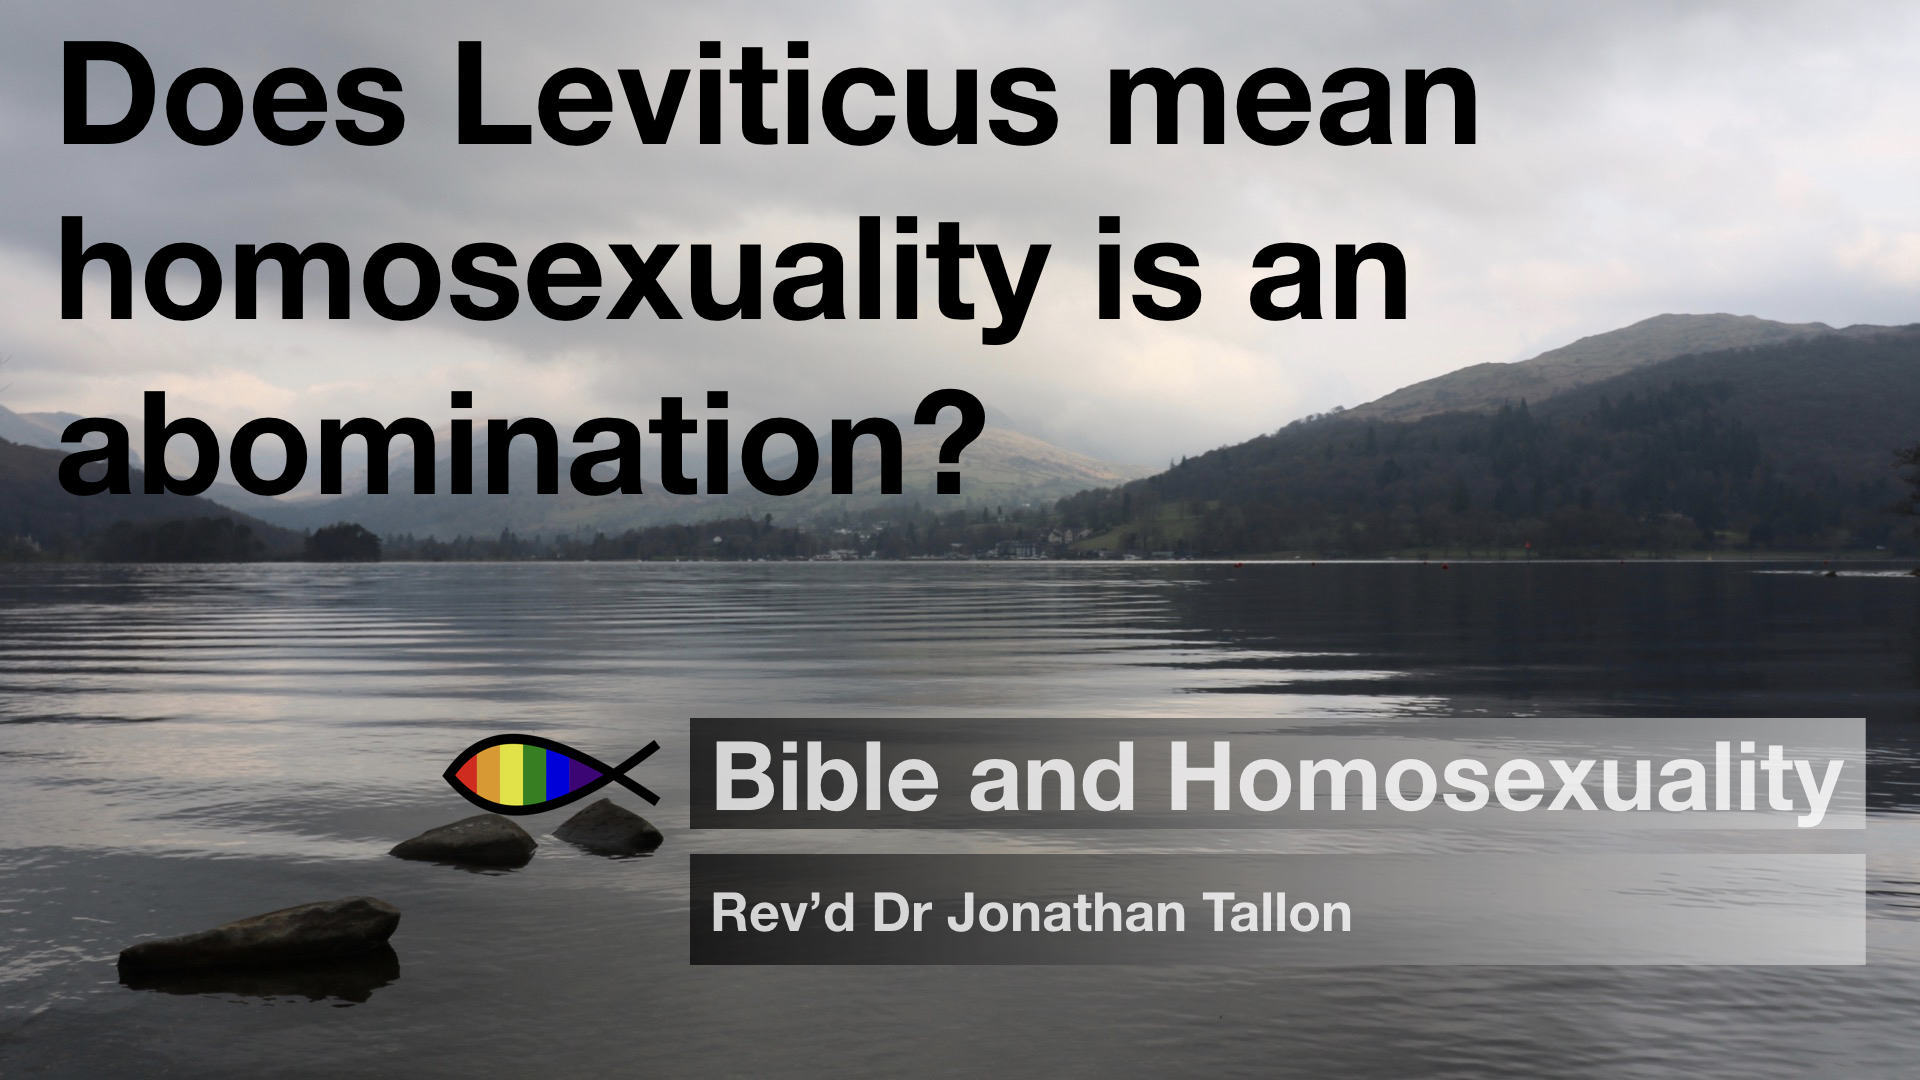 Does Leviticus mean homosexuality is an abomination?